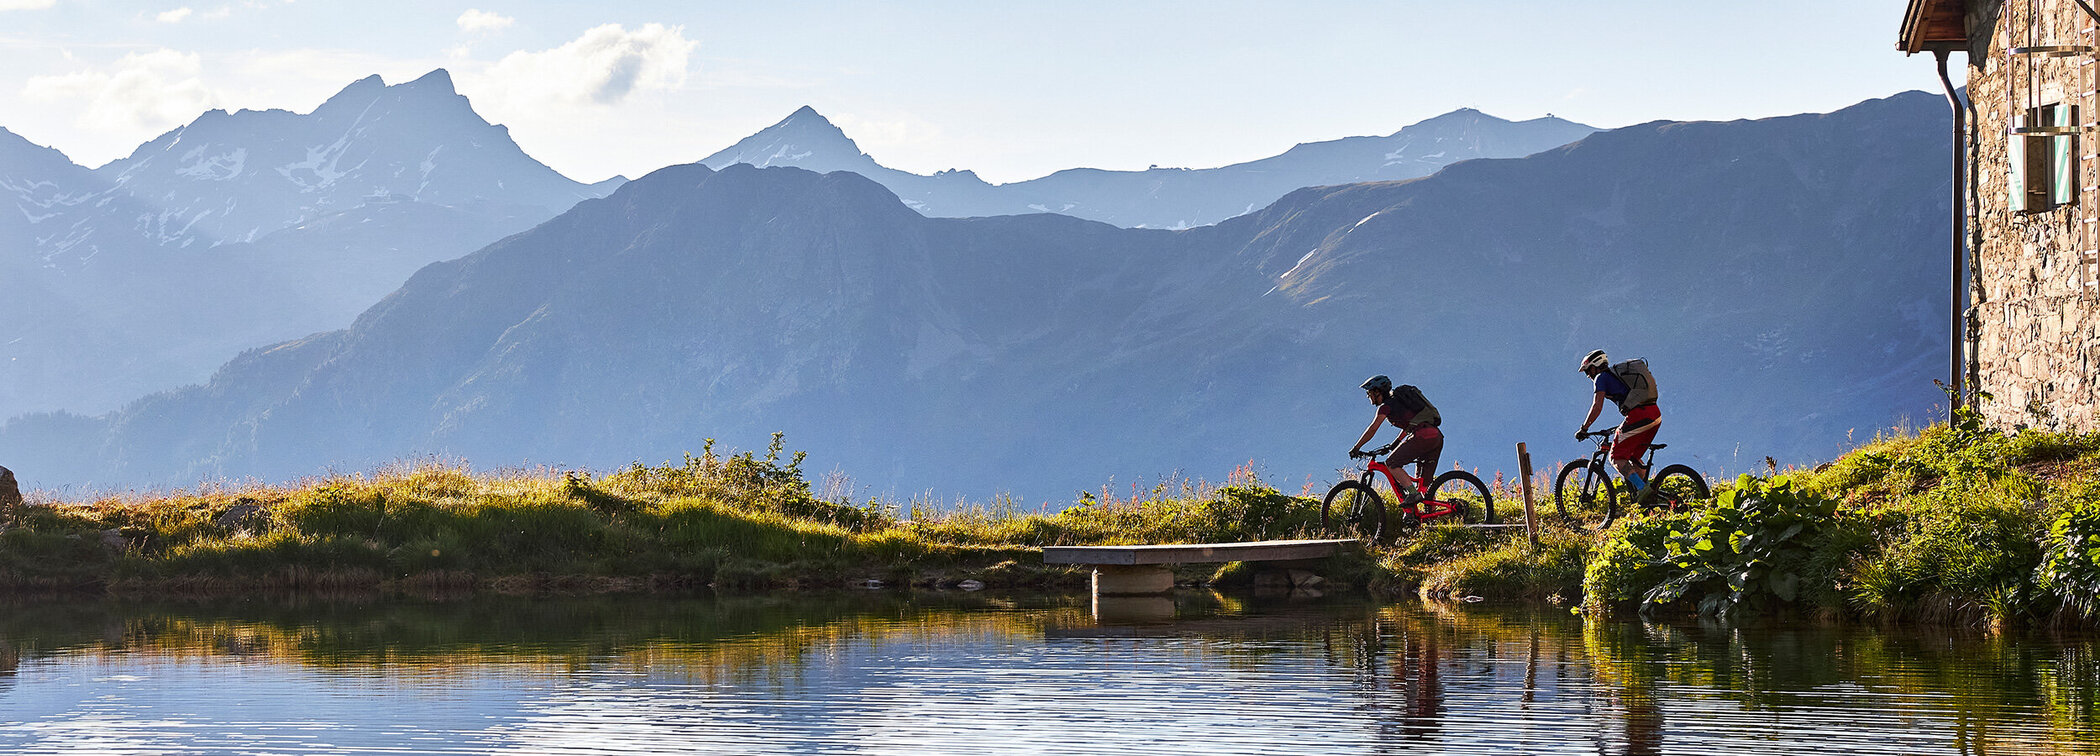  On two wheels discover the mountains Biking in Ischgl